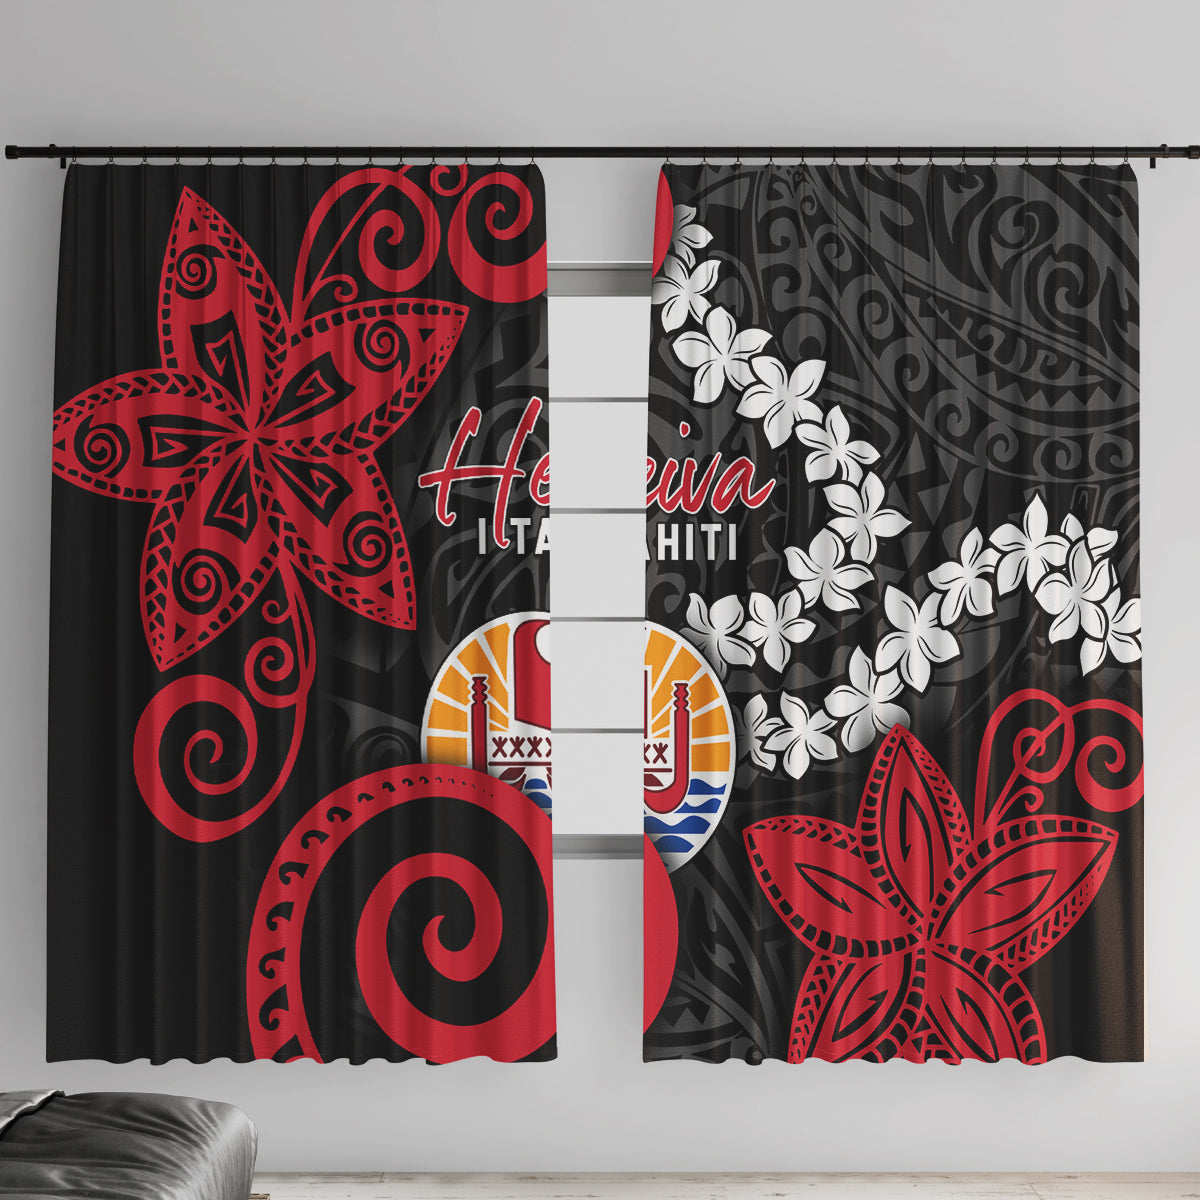 Tahiti Heiva Festival Window Curtain Floral Pattern With Coat Of Arms